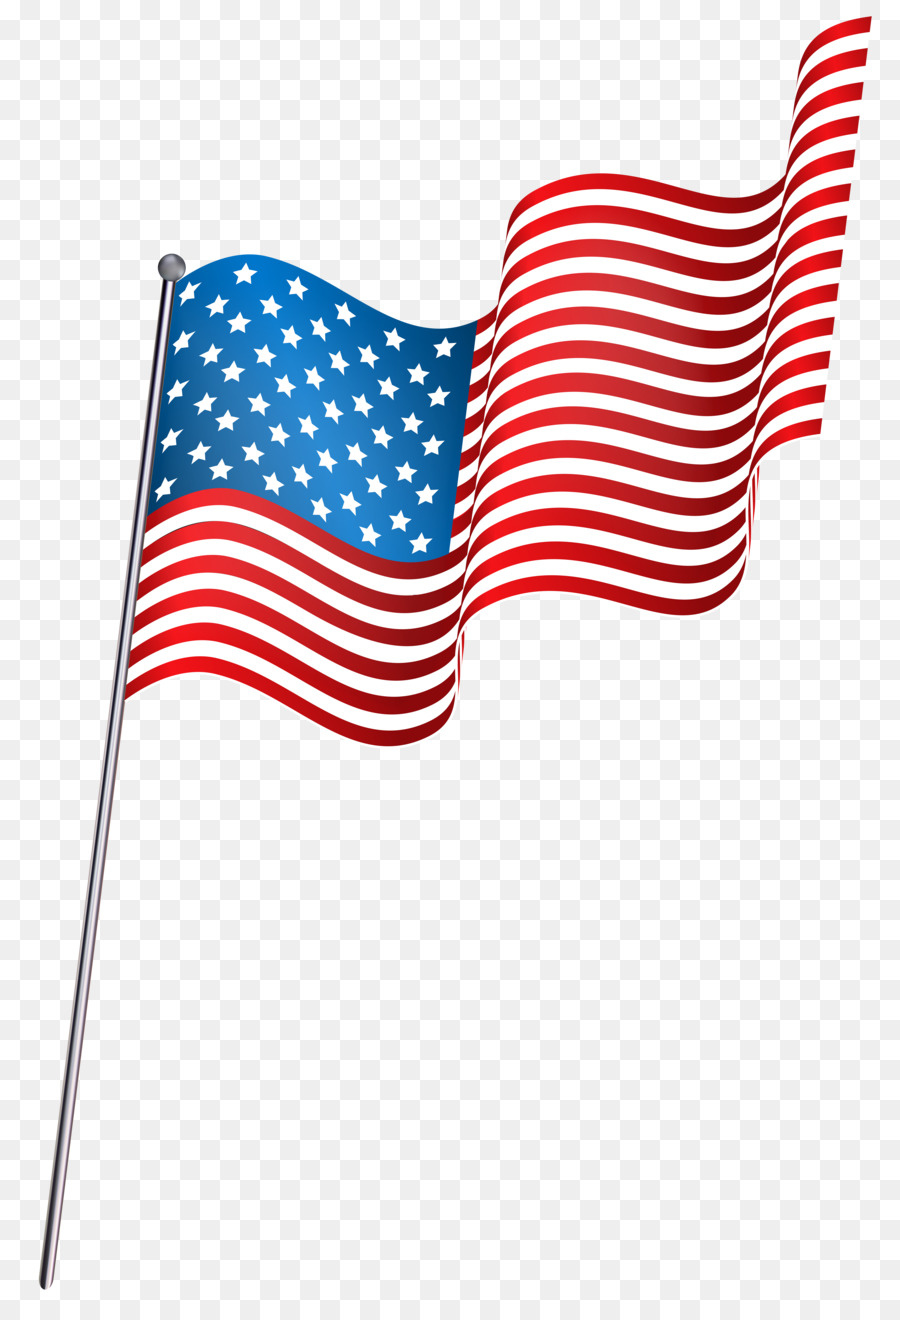 Flag of the United States Clip art - America png download - 5510*8000 - Free Transparent United States png Download.